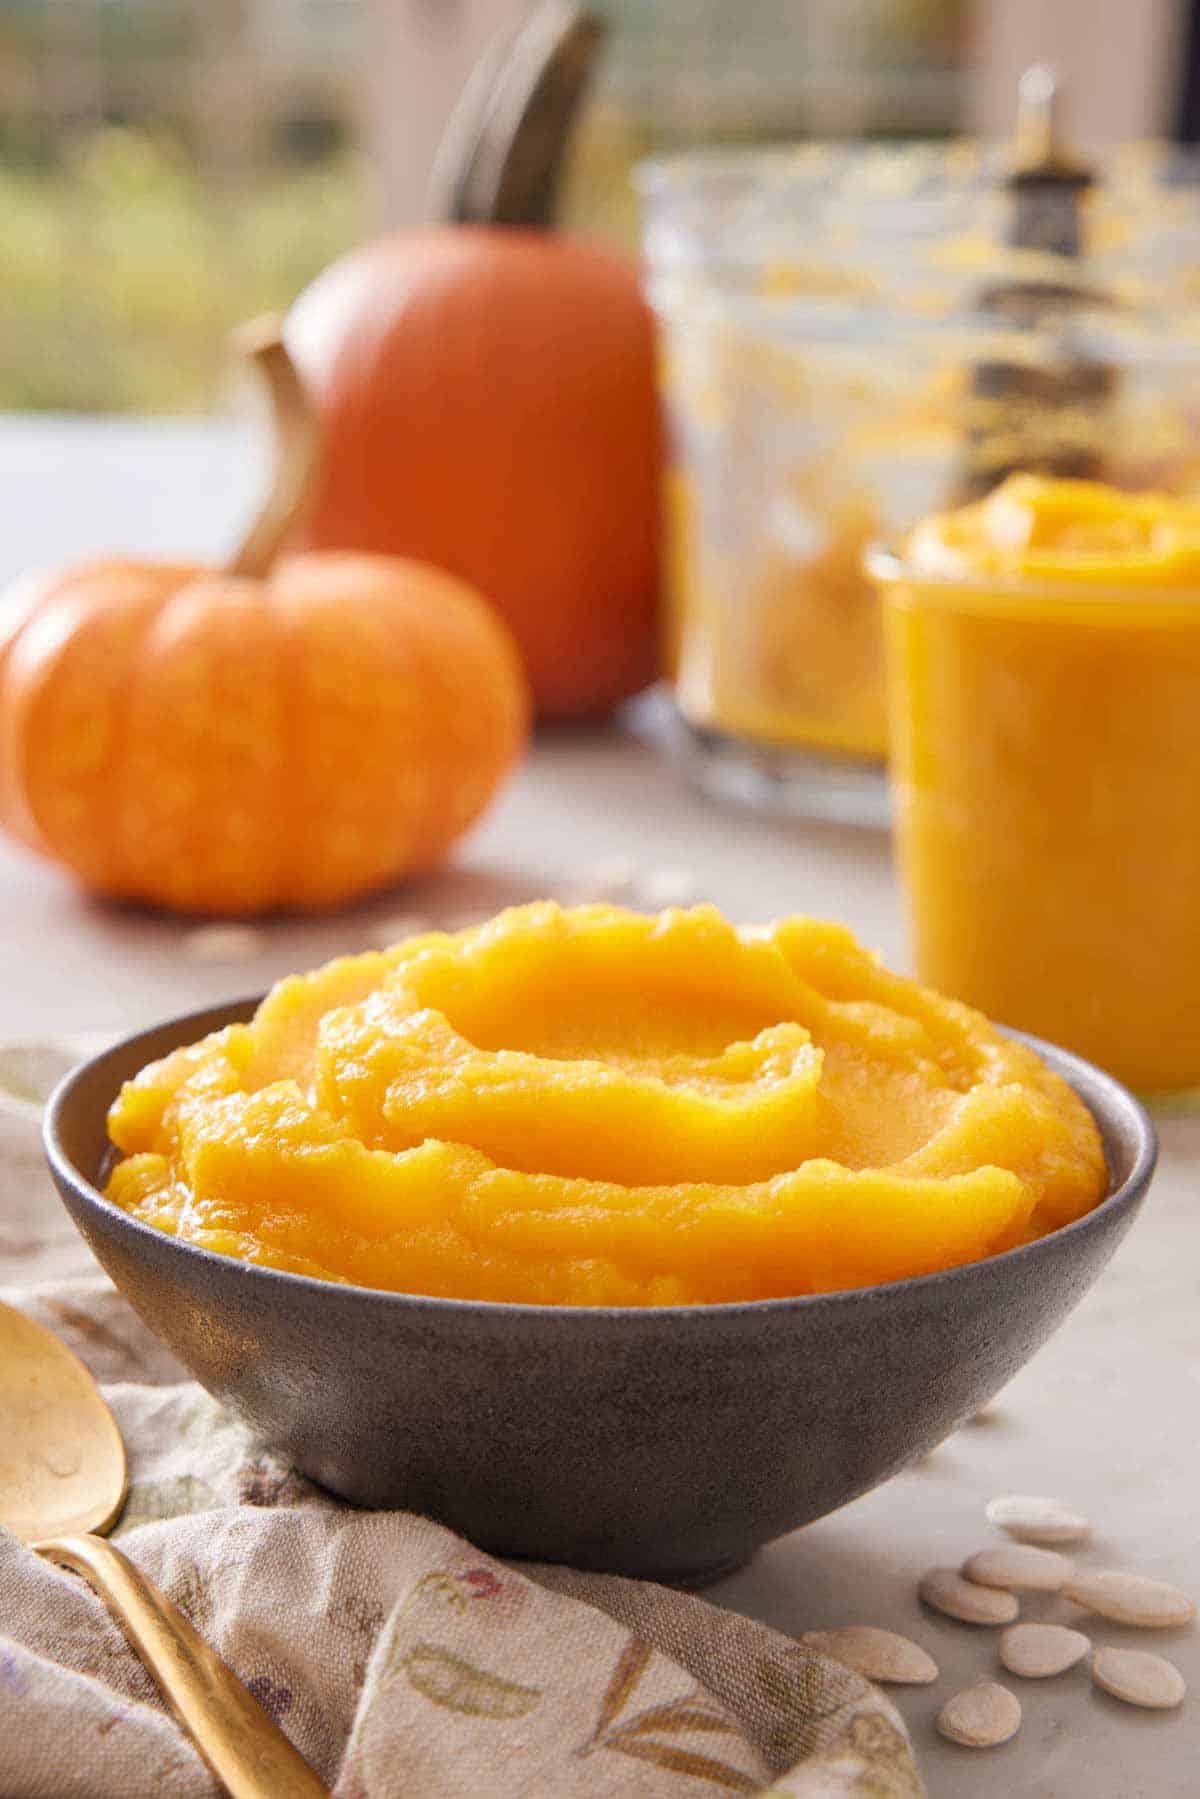 A bowl of pumpkin puree with some pumpkins in the background alongside a food processor bowl and a jar of puree.